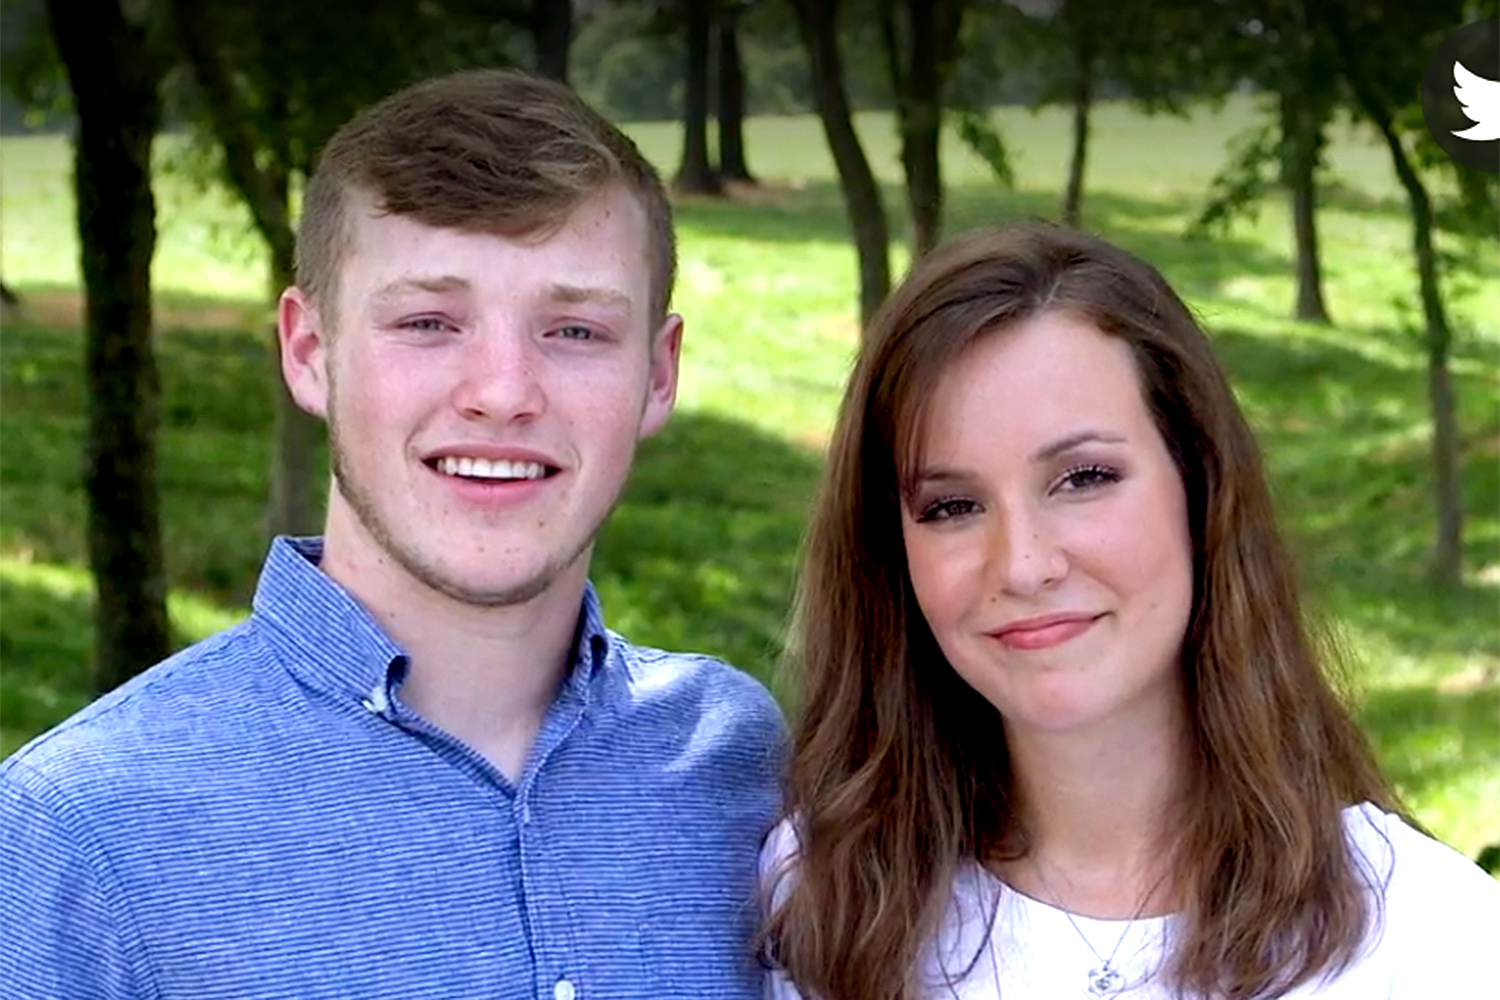 Claire Duggar And Justin Pregnant And Expecting Their First Child?